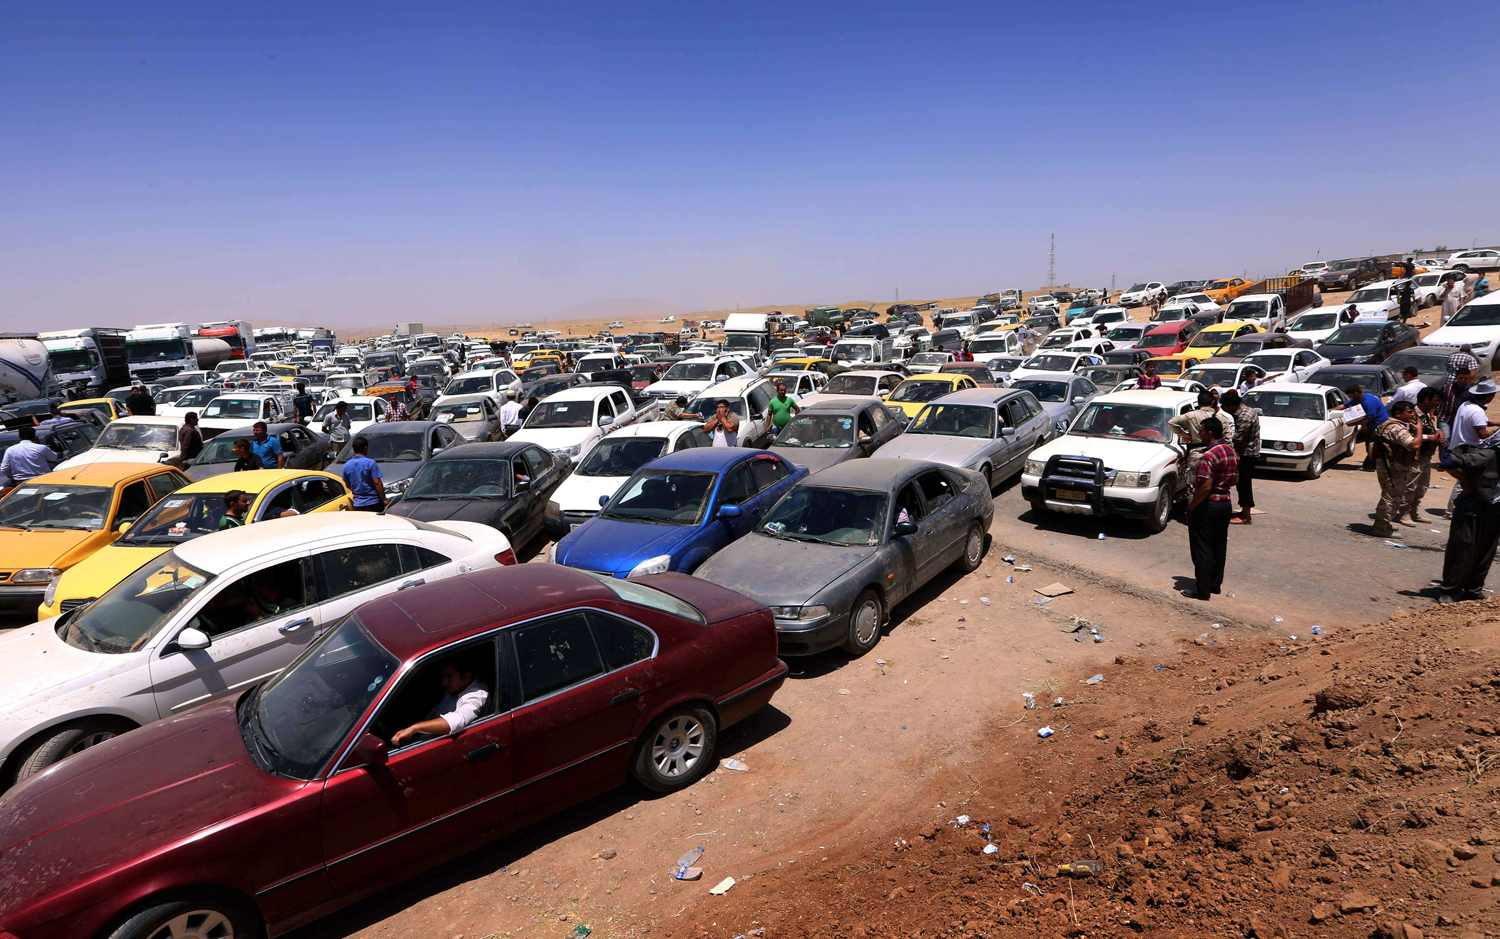 Iraqis fleeing violence in the Nineveh province wait in their vehicles at a Kurdish checkpoint in Aski Kalak, 25 miles West of Arbil, the capital of the autonomous Kurdish region of northern Iraq, on June 10, 2014. 